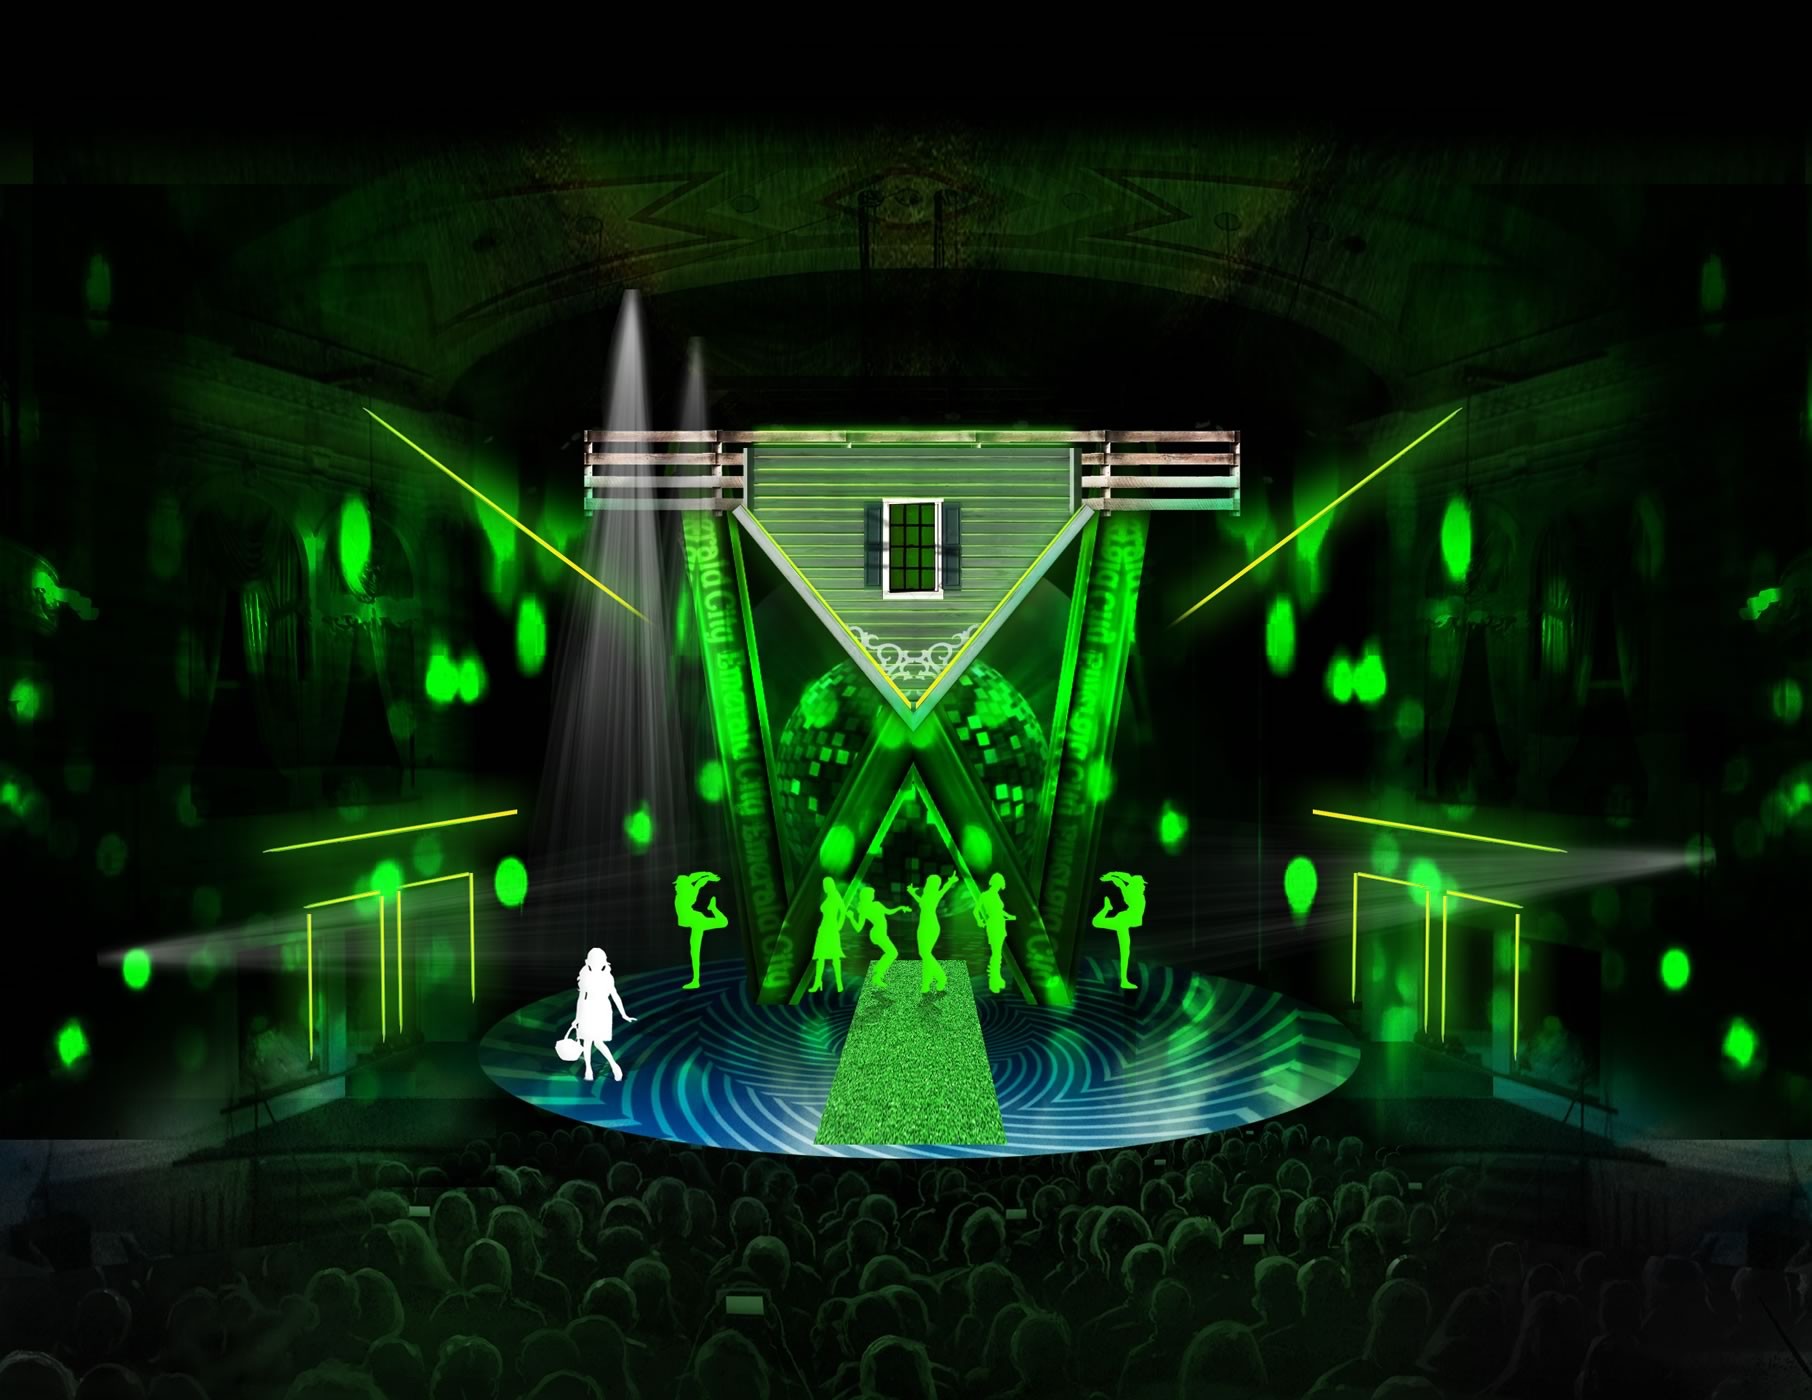 set design for The Wiz in the Emerald City scene includes dramatic kelly-green lighting in directed beams all over the stage, an inverted house with peaked roof floating above the stage.  